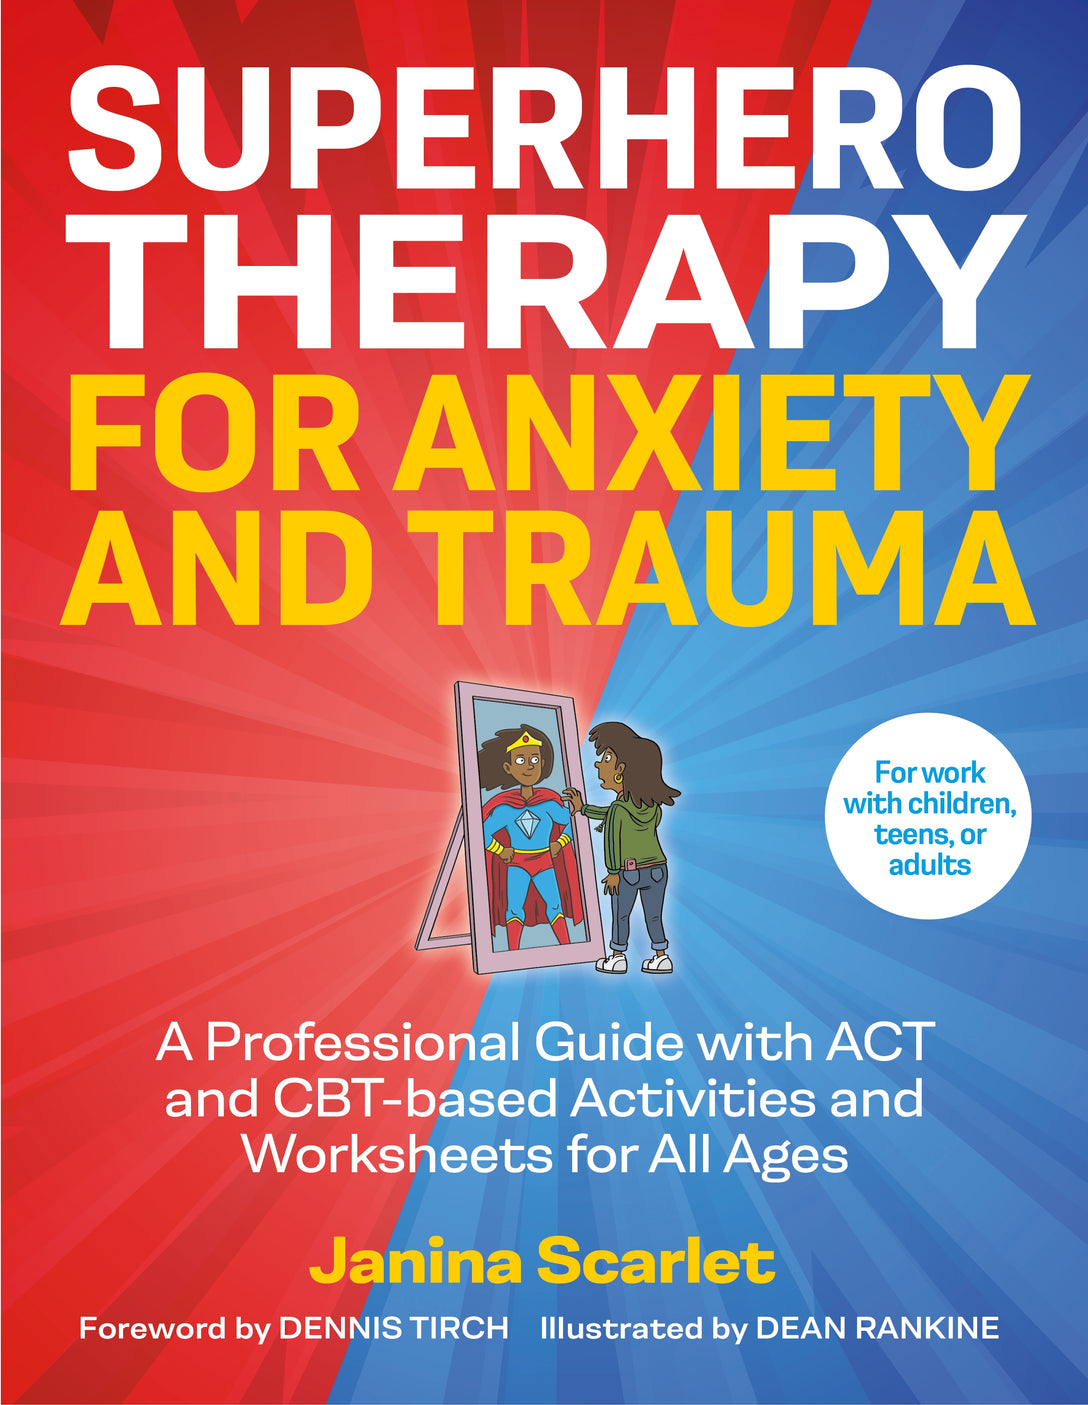 Superhero Therapy for Anxiety and Trauma by Janina Scarlet, Dean Rankine, Dennis Tirch